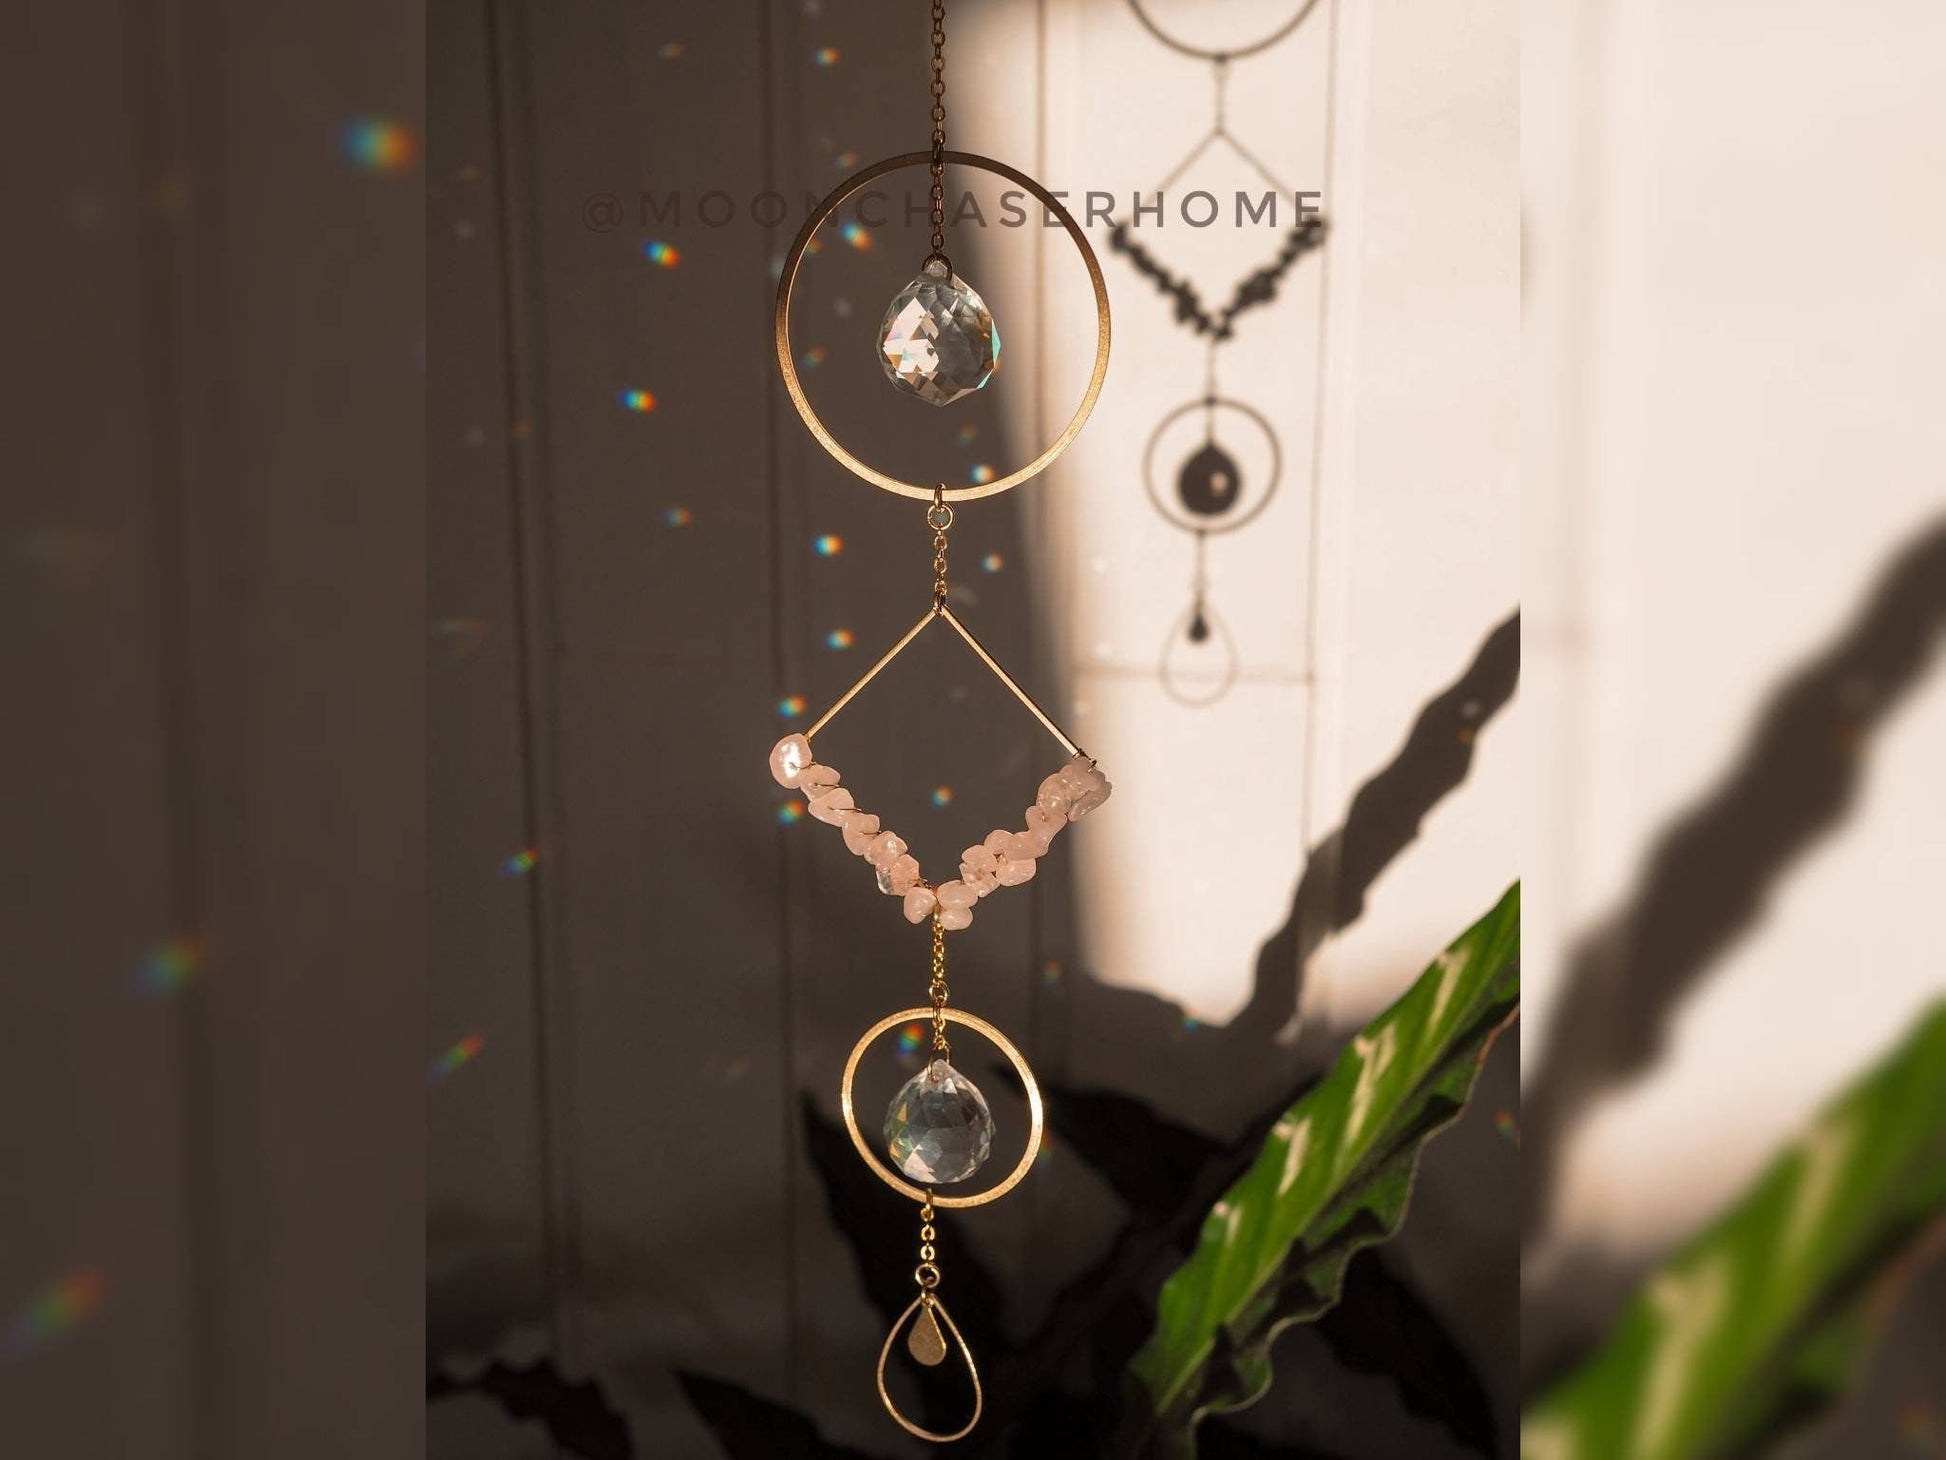 Anise crystal suncatcher with natural crystals, rainbow prism, light diffuser, boho home decoration,gift for woman, amethyst, rose quartz